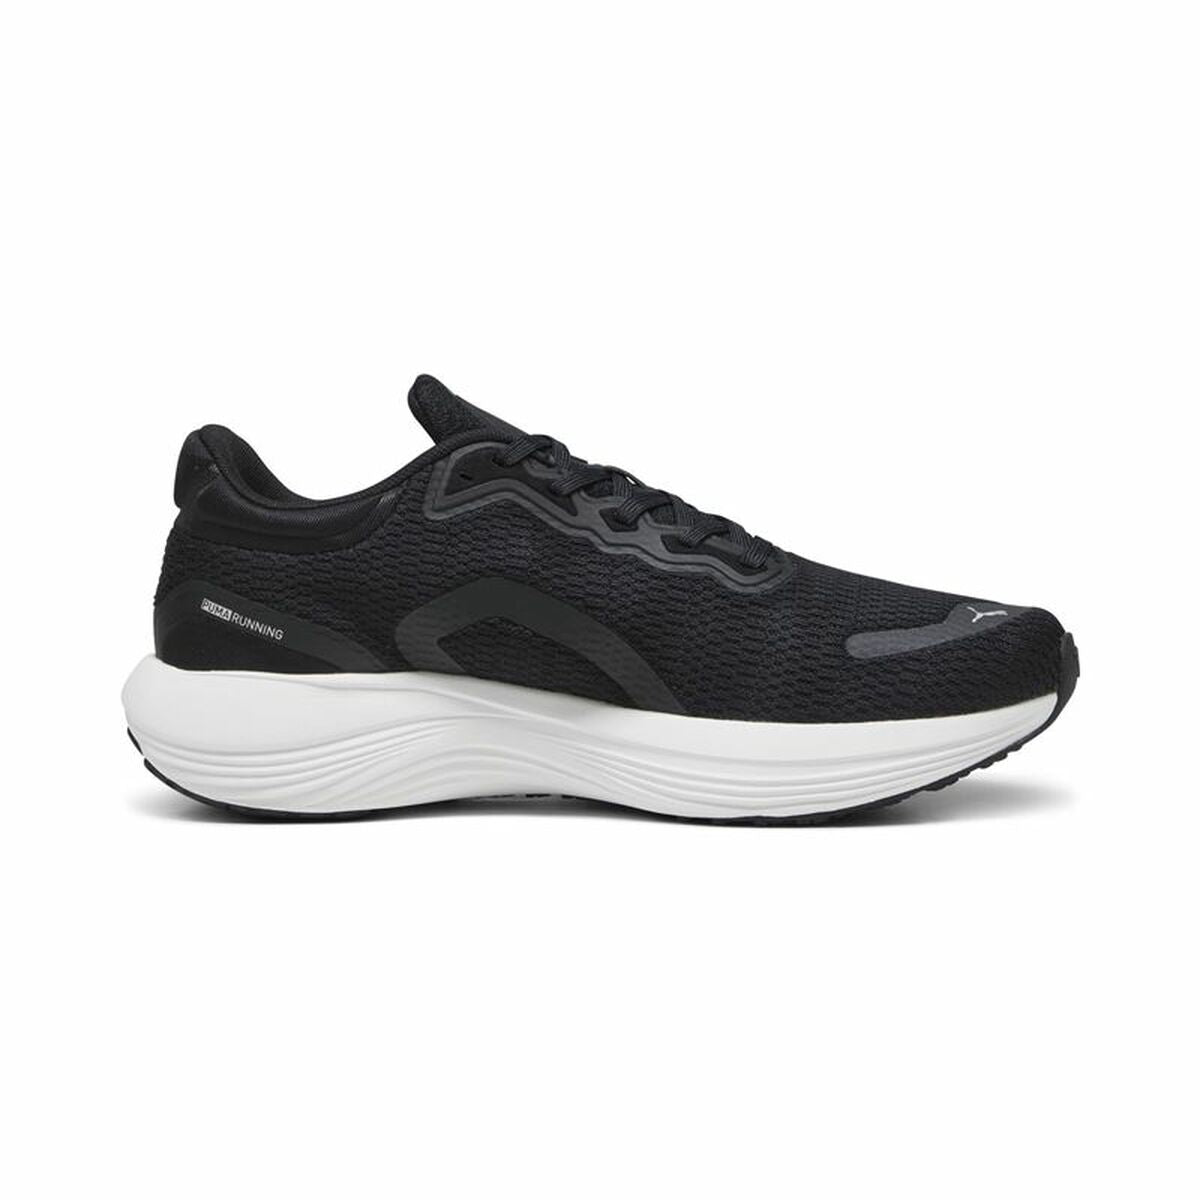 Running Shoes for Adults Puma Scend Pro Black Men